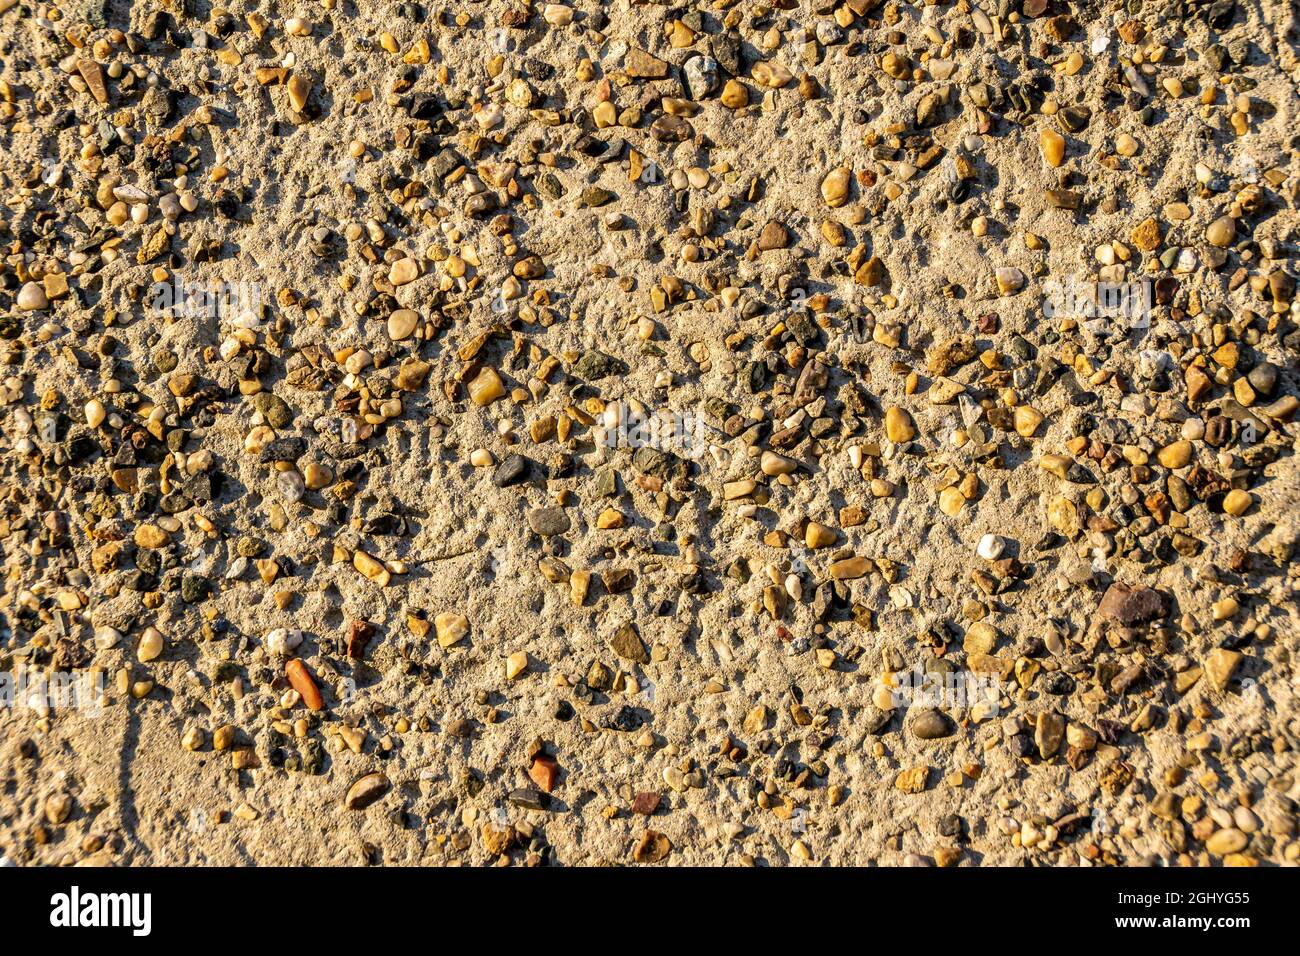 textured background created by a surface of sand covered with a non-uniform layer of fine gravel Stock Photo